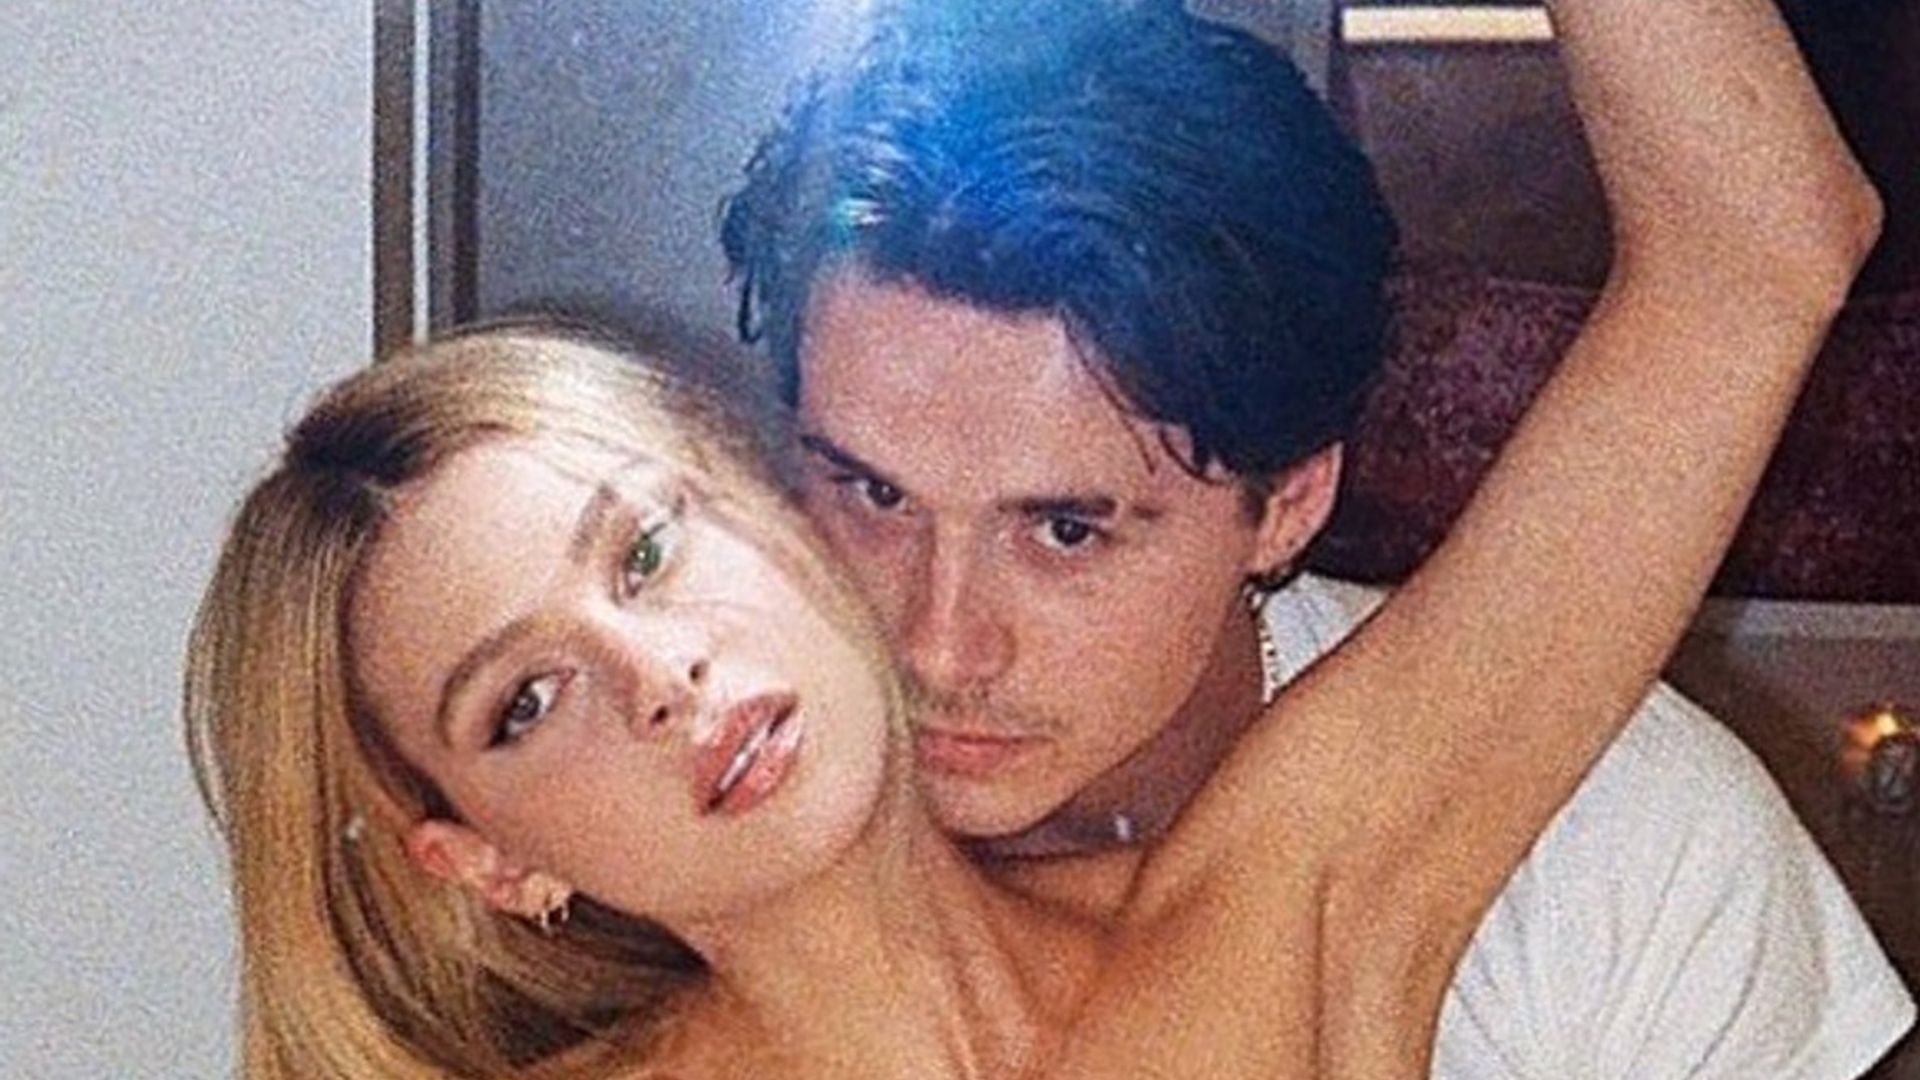 Brooklyn Beckham poses topless with fiancée for intimate photo - fans react